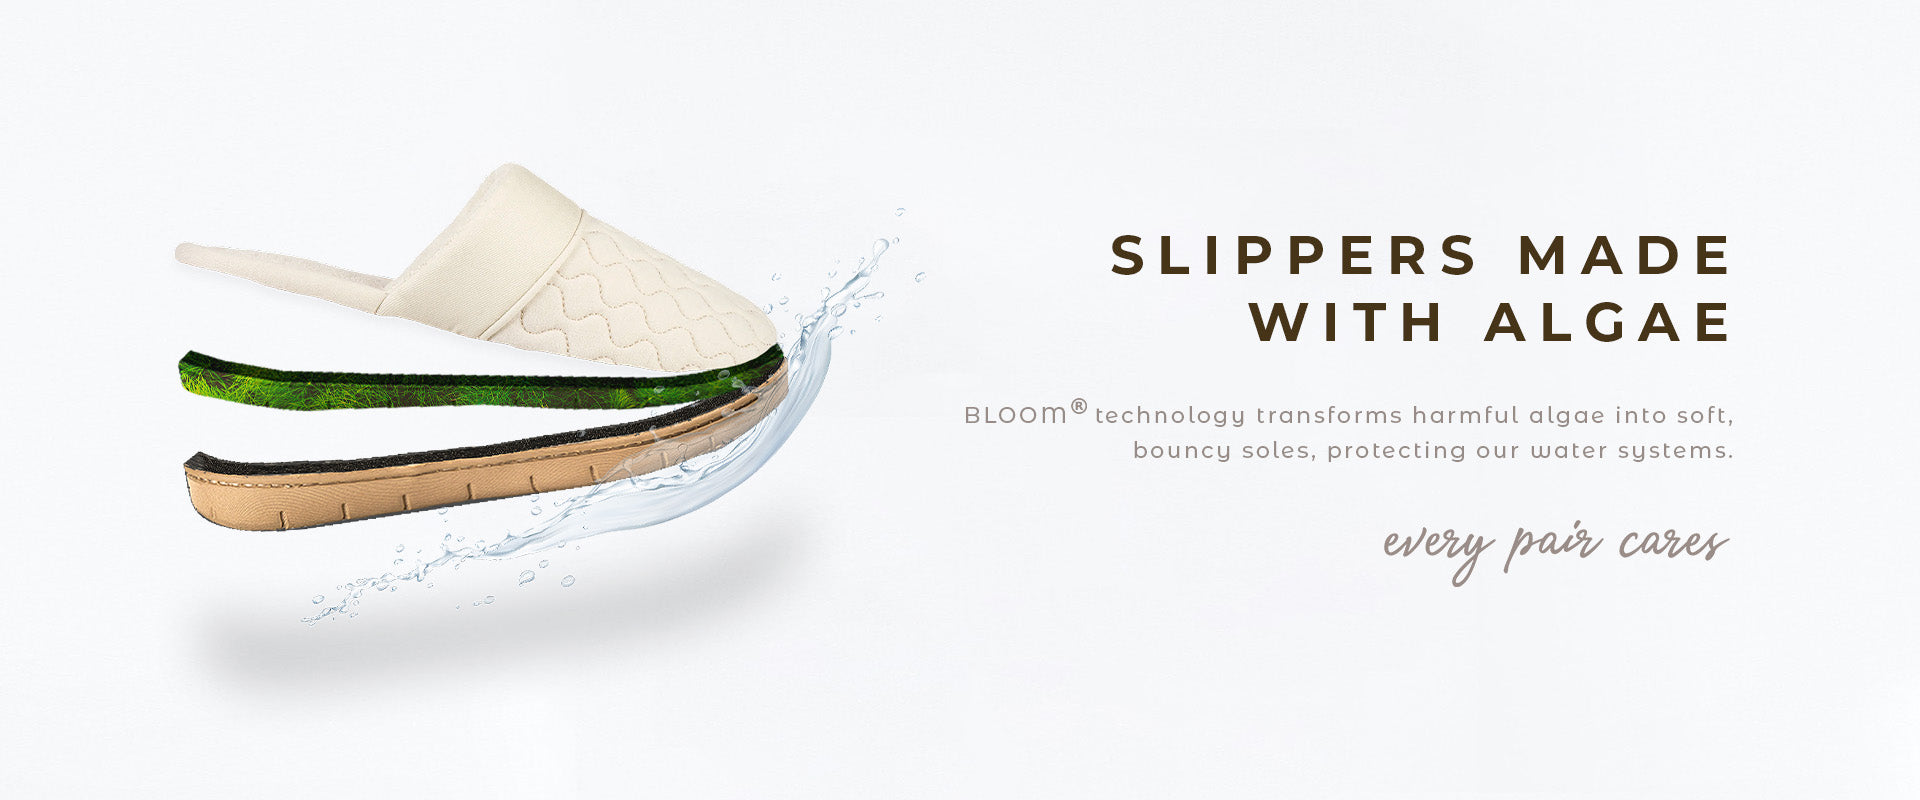 Slippers Made with Algae